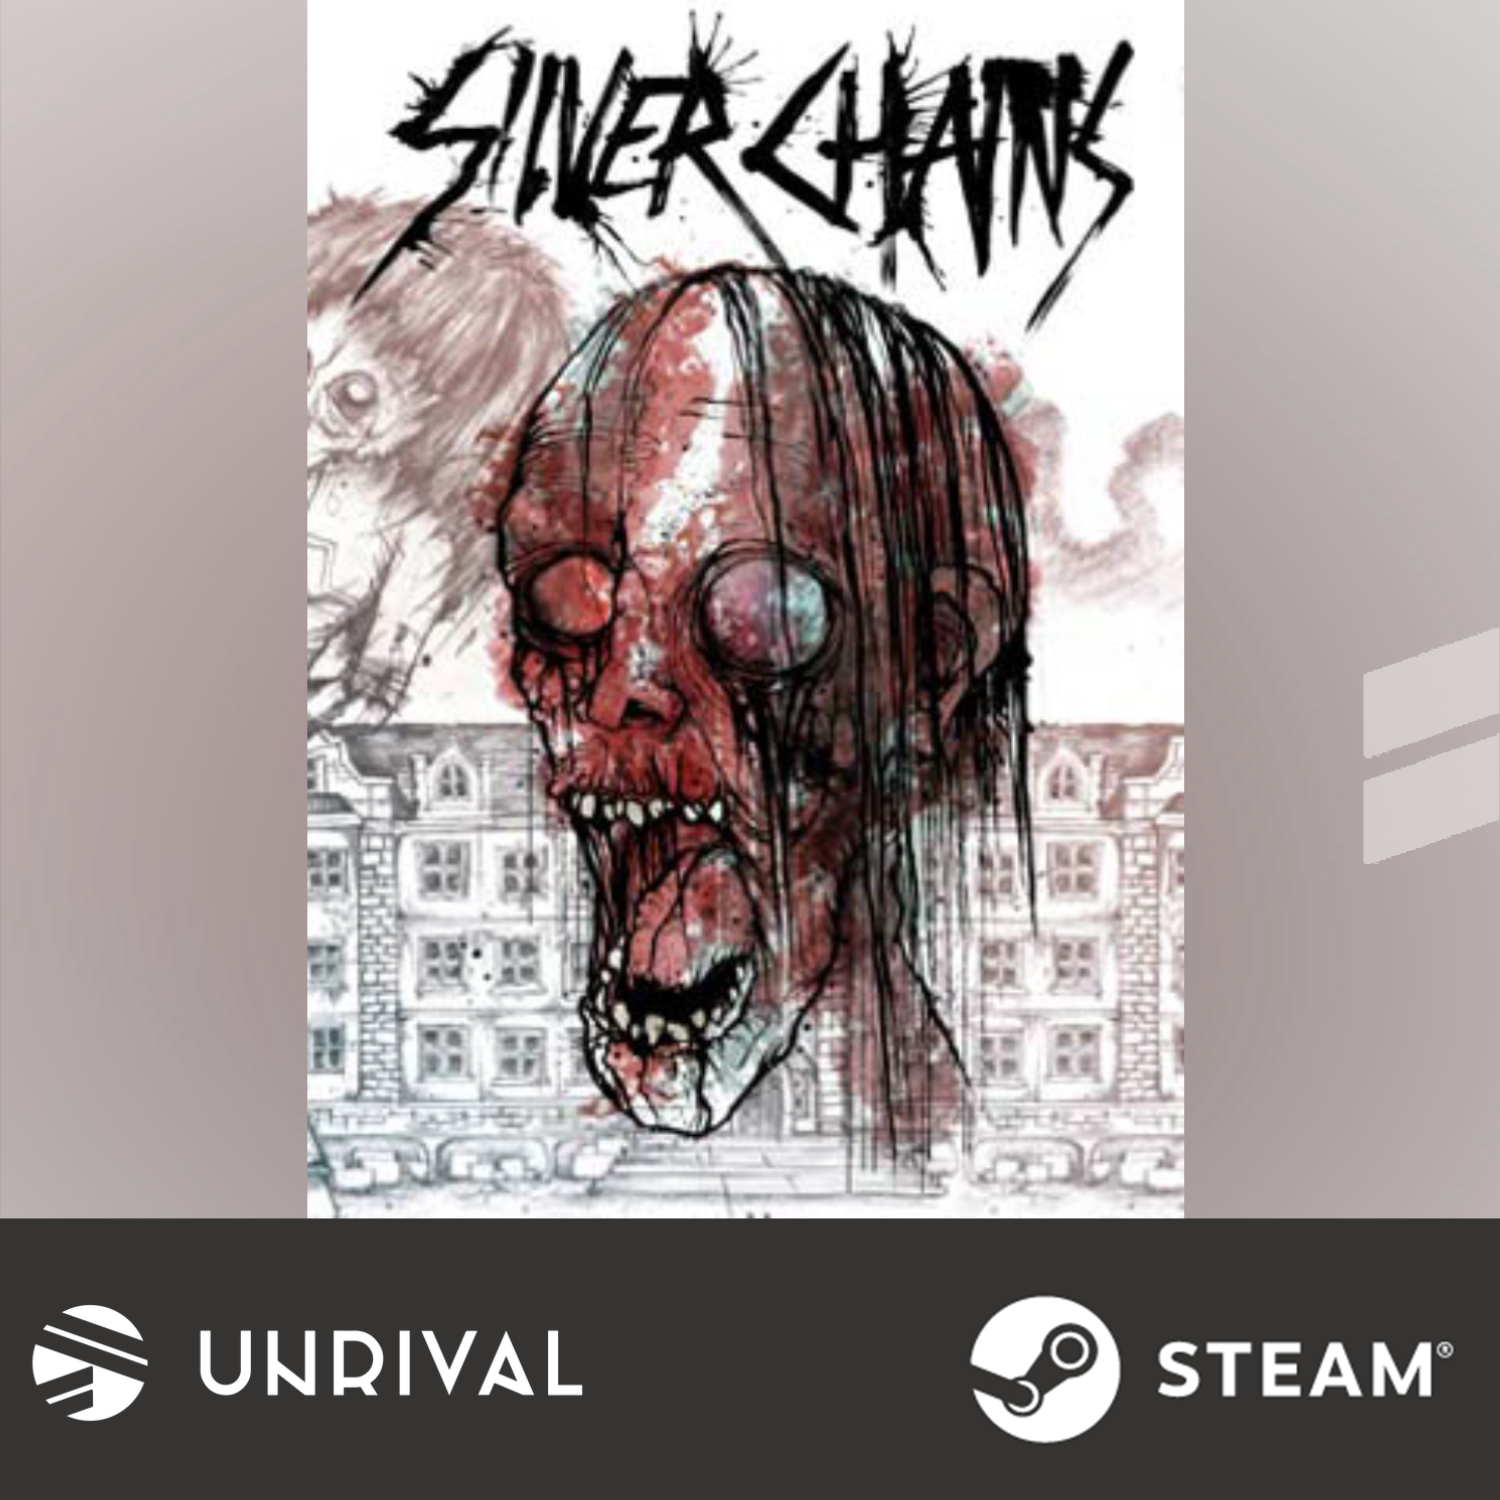 [Hot Sale] Silver Chains PC Digital Download Game (Single Player) - Unrival